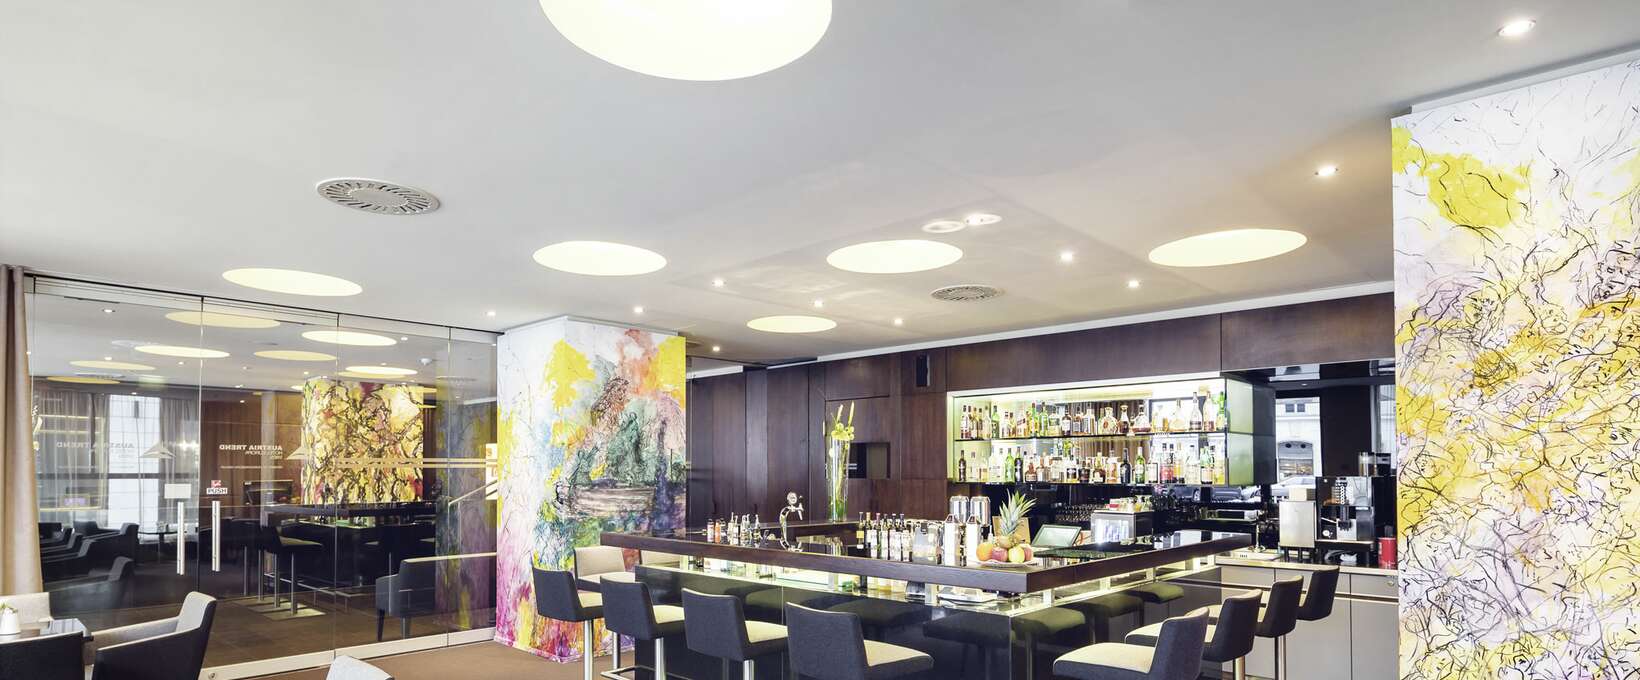 Hotel bar with counter and seating area | Hotel Europa Wien 